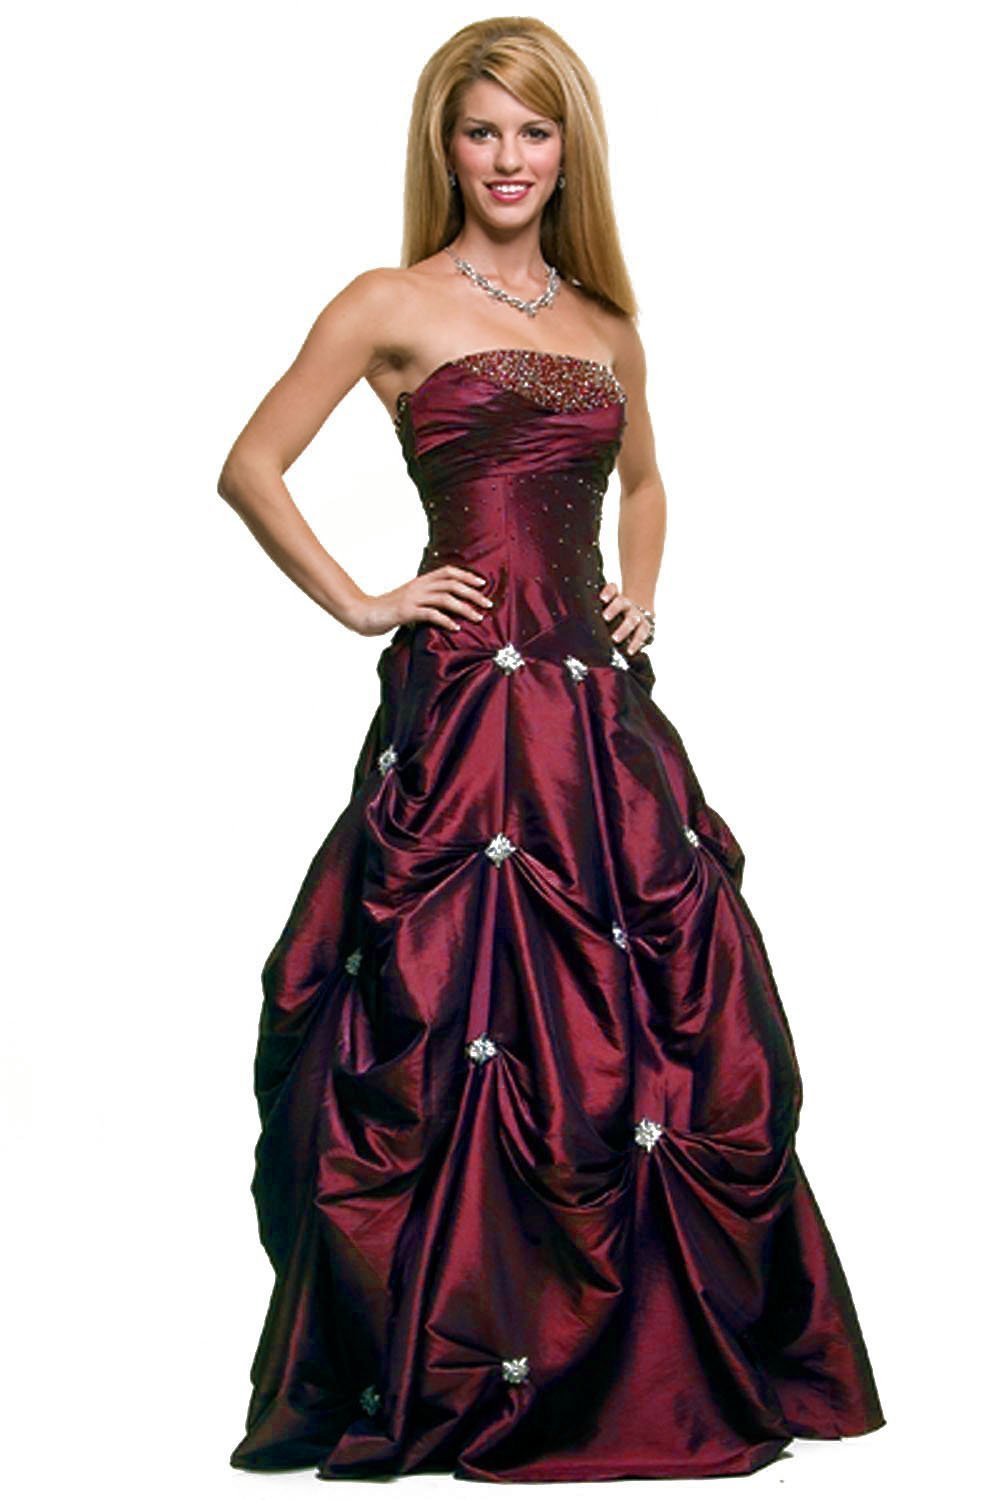 Cheap ball gowns - Wedding ball gowns for prom